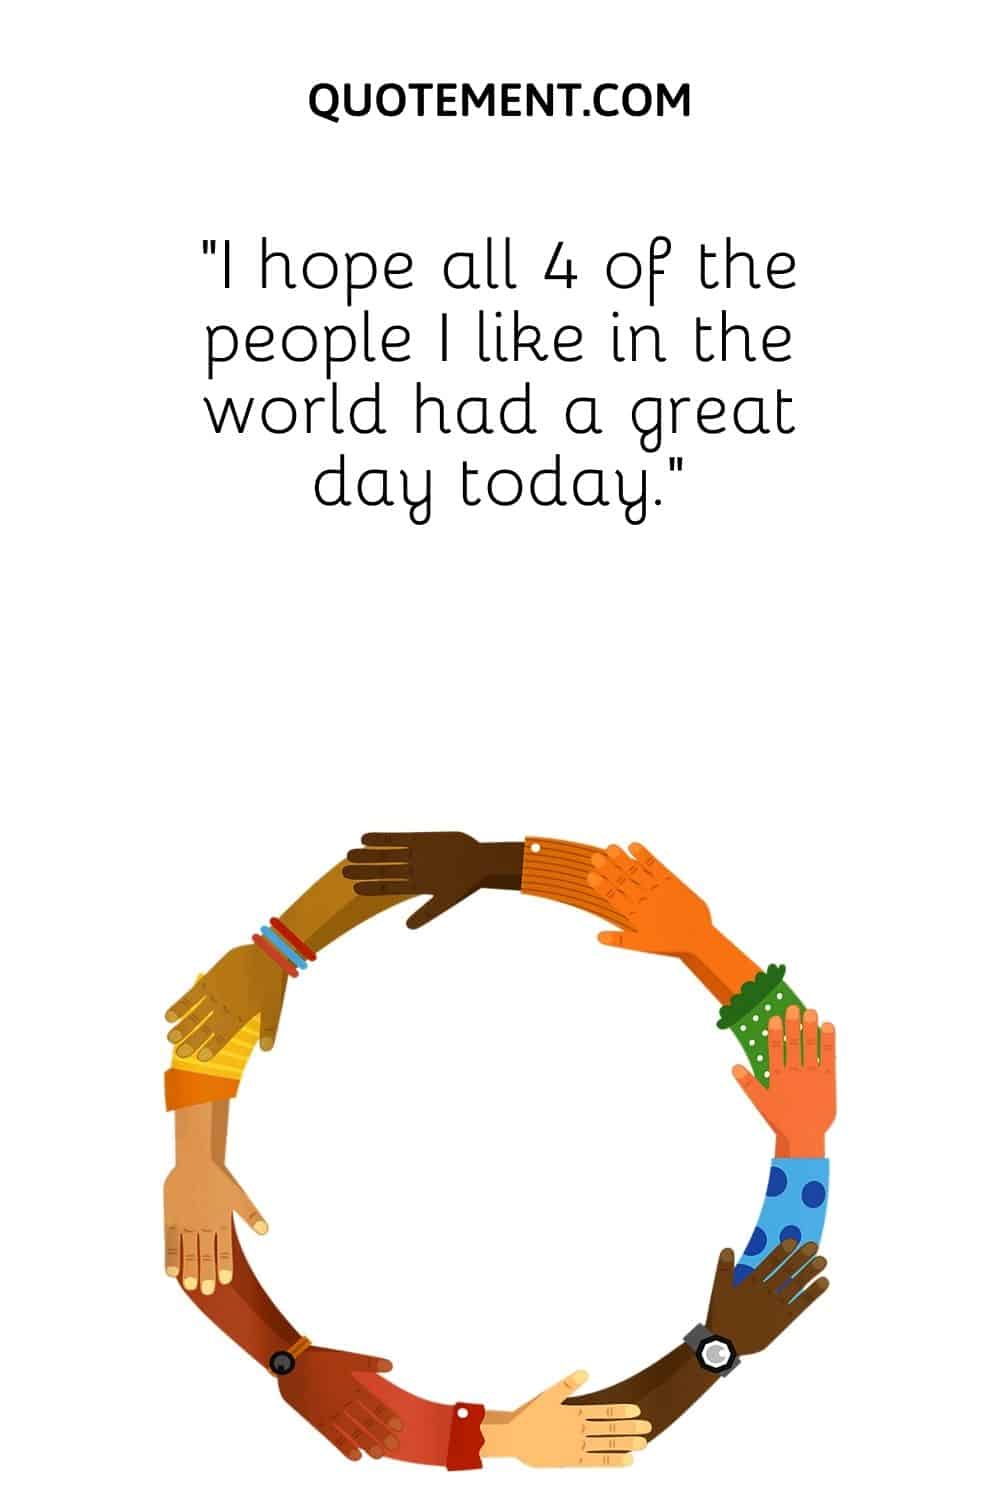 “I hope all 4 of the people I like in the world had a great day today.”